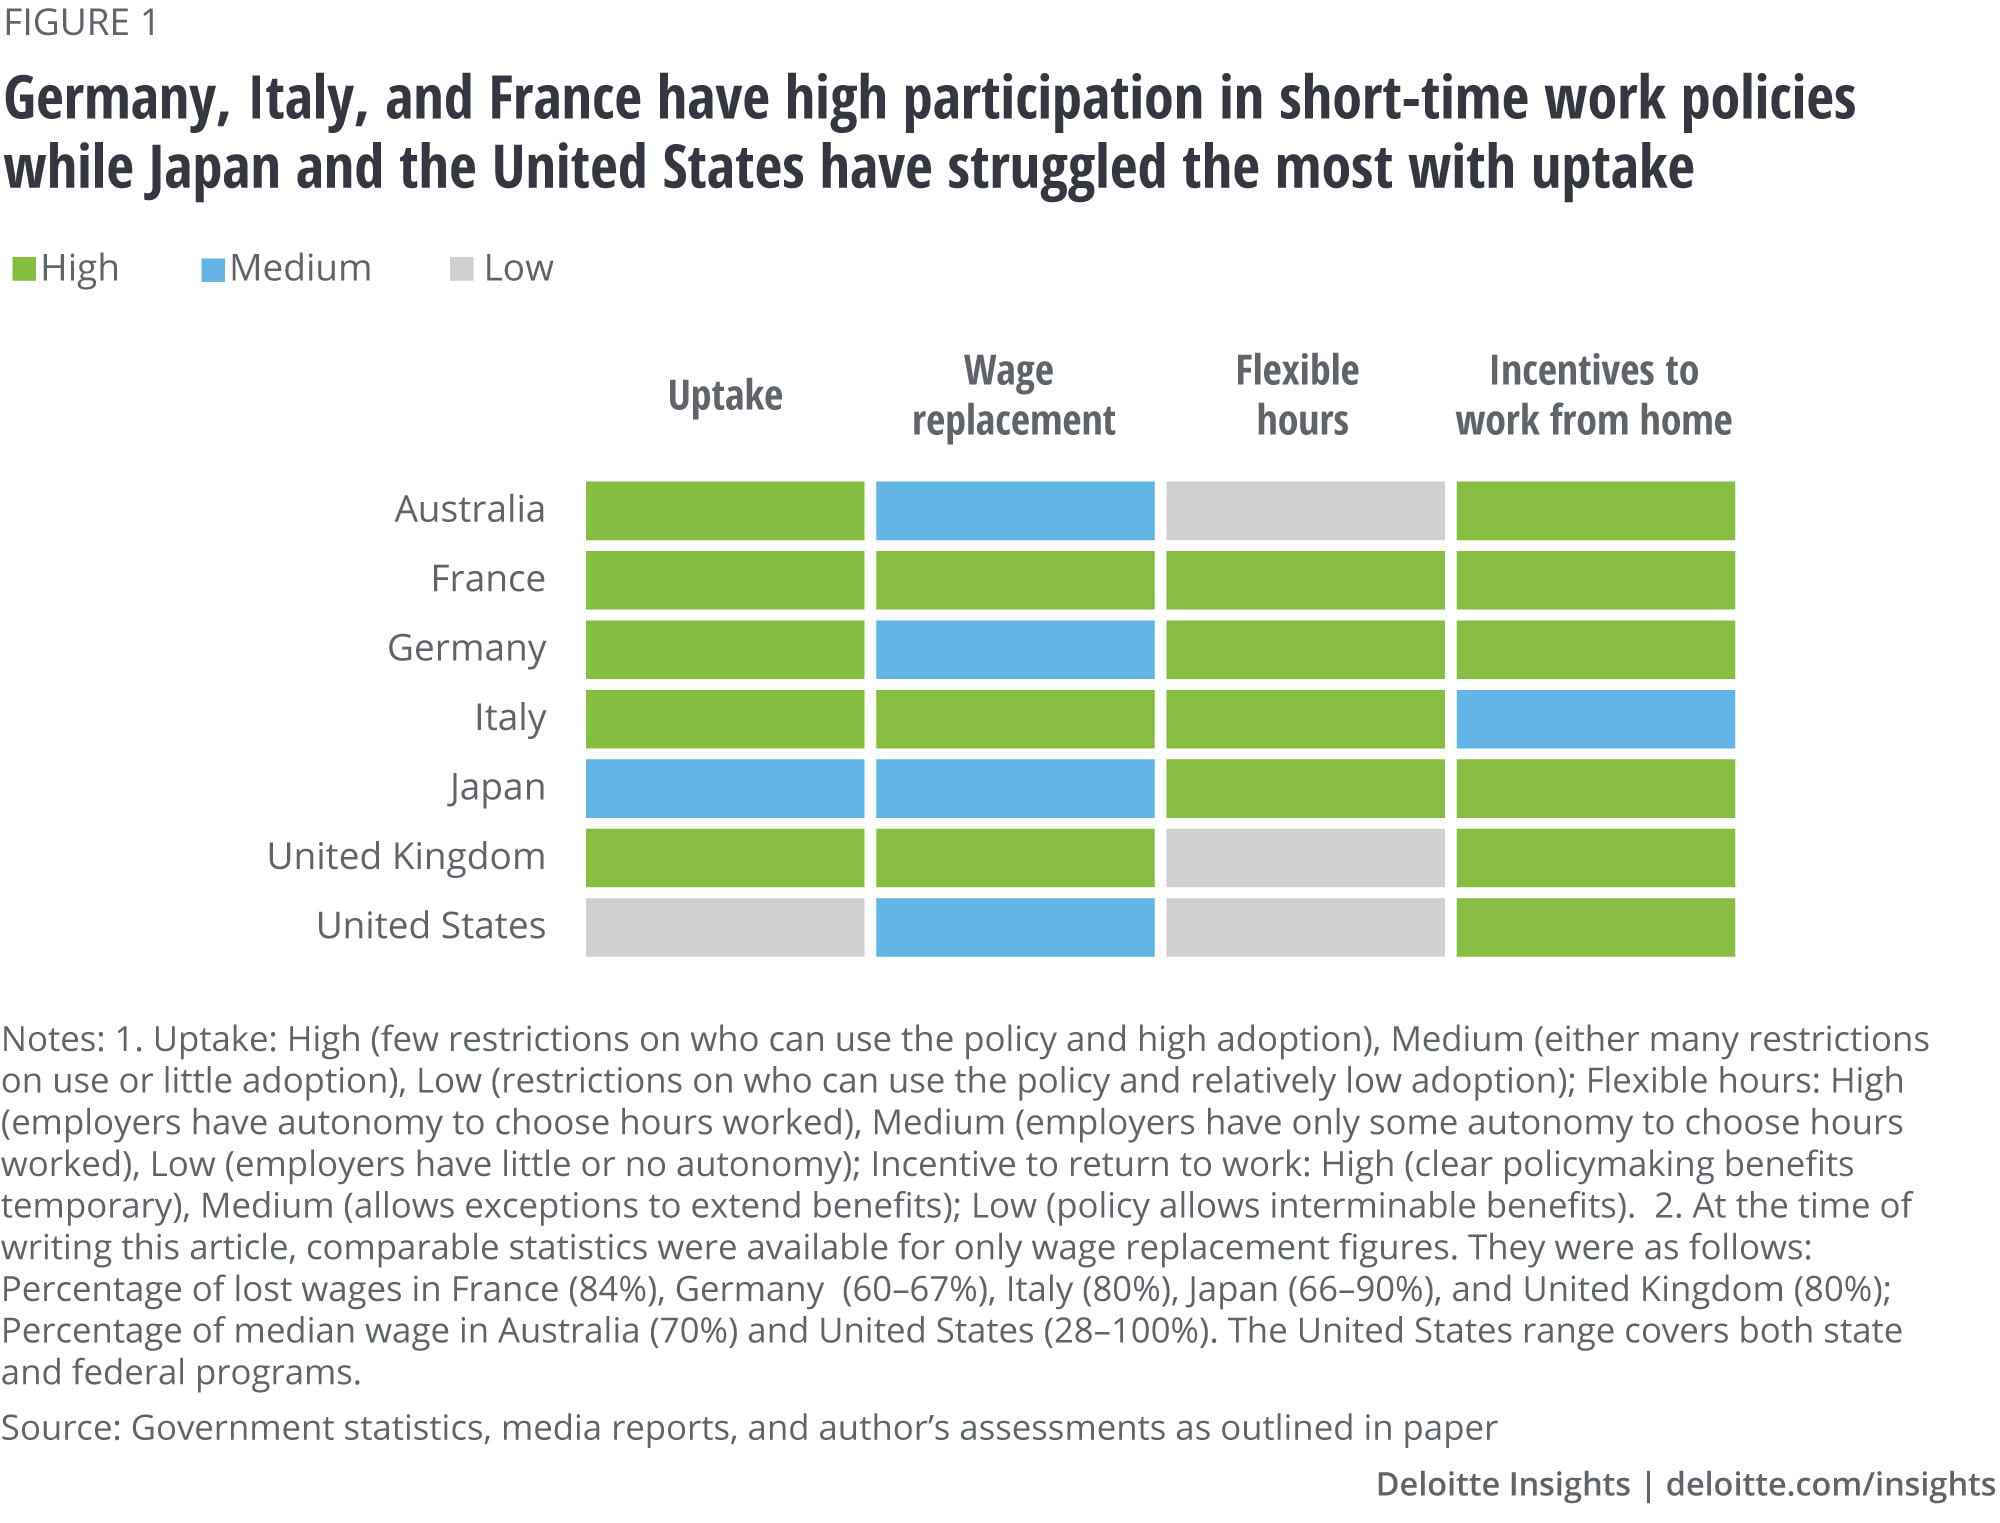 Germany, Italy, and France have high participation in short-time work policies while Japan and the United States have struggled the most with uptake